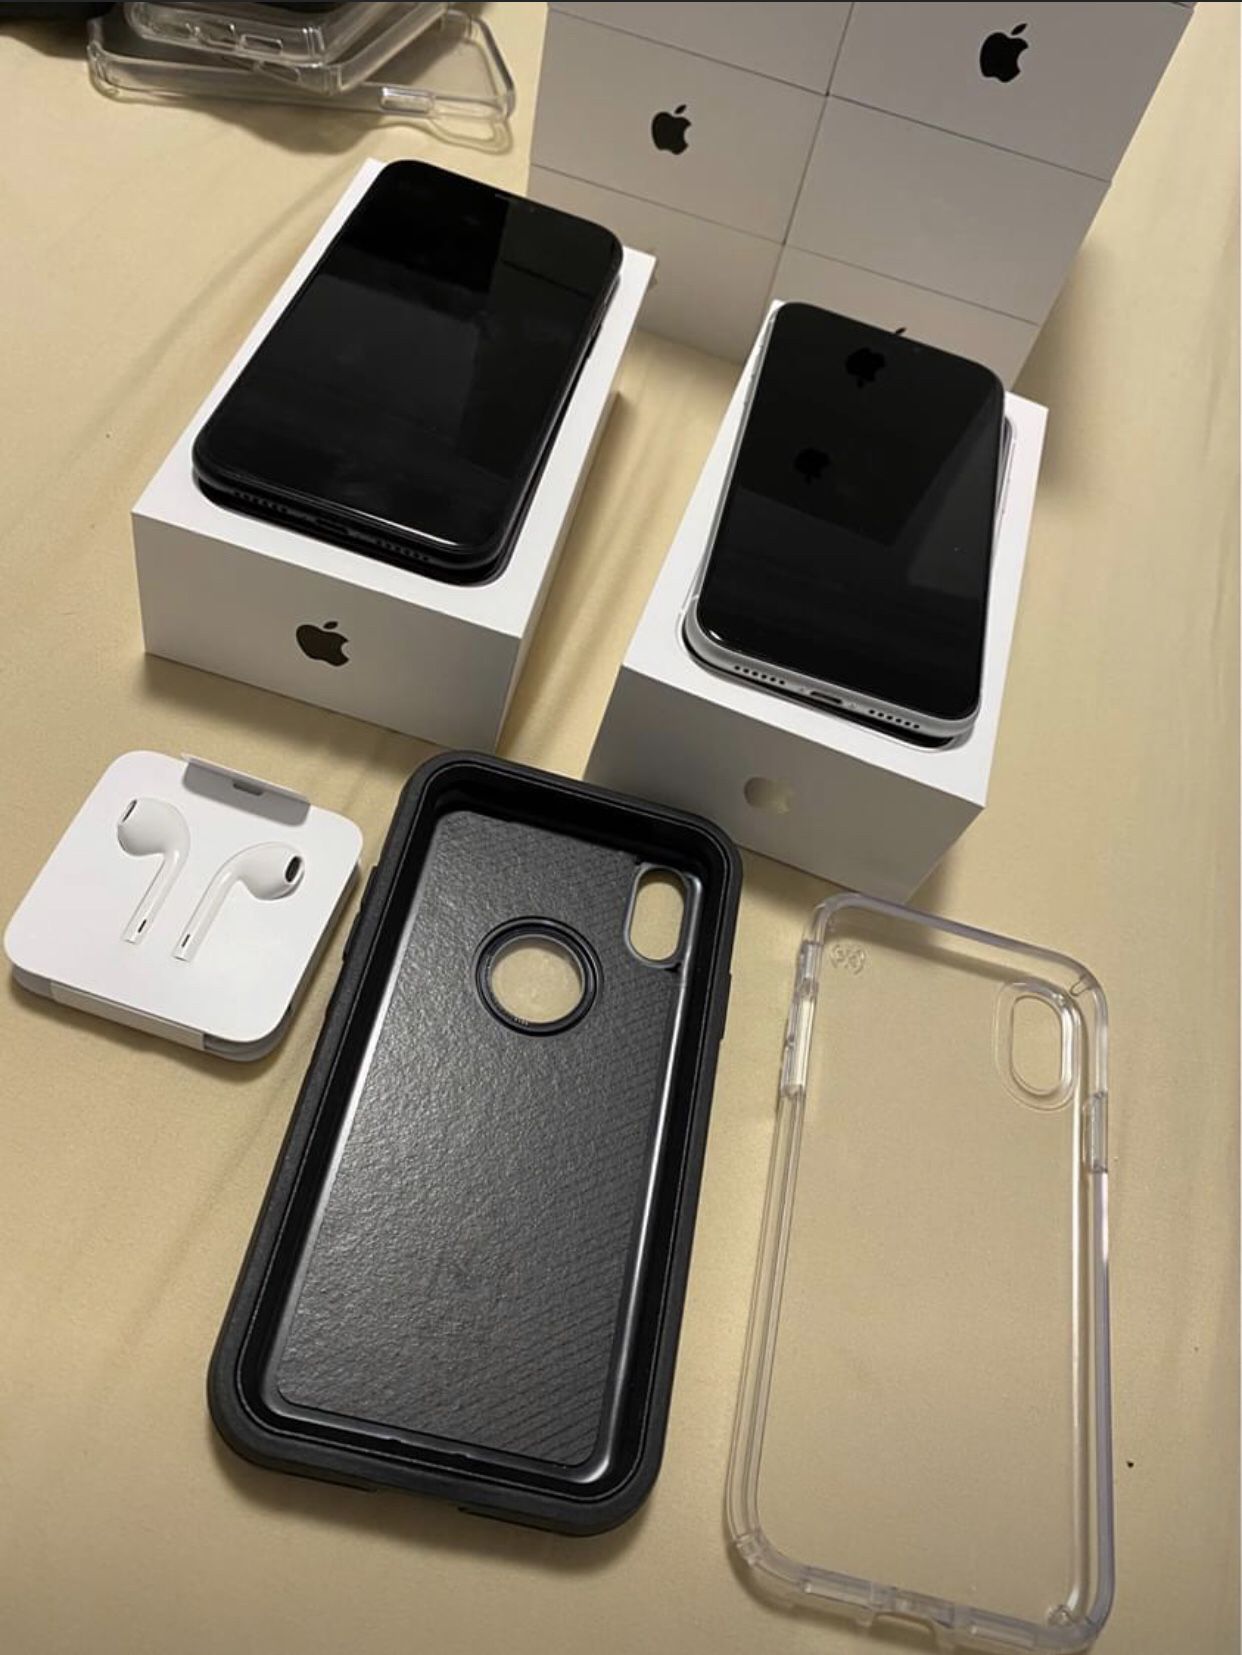 iPhone XR Unlocked with Apple Headphones, Otterbox Case, Screen Protector, and Box